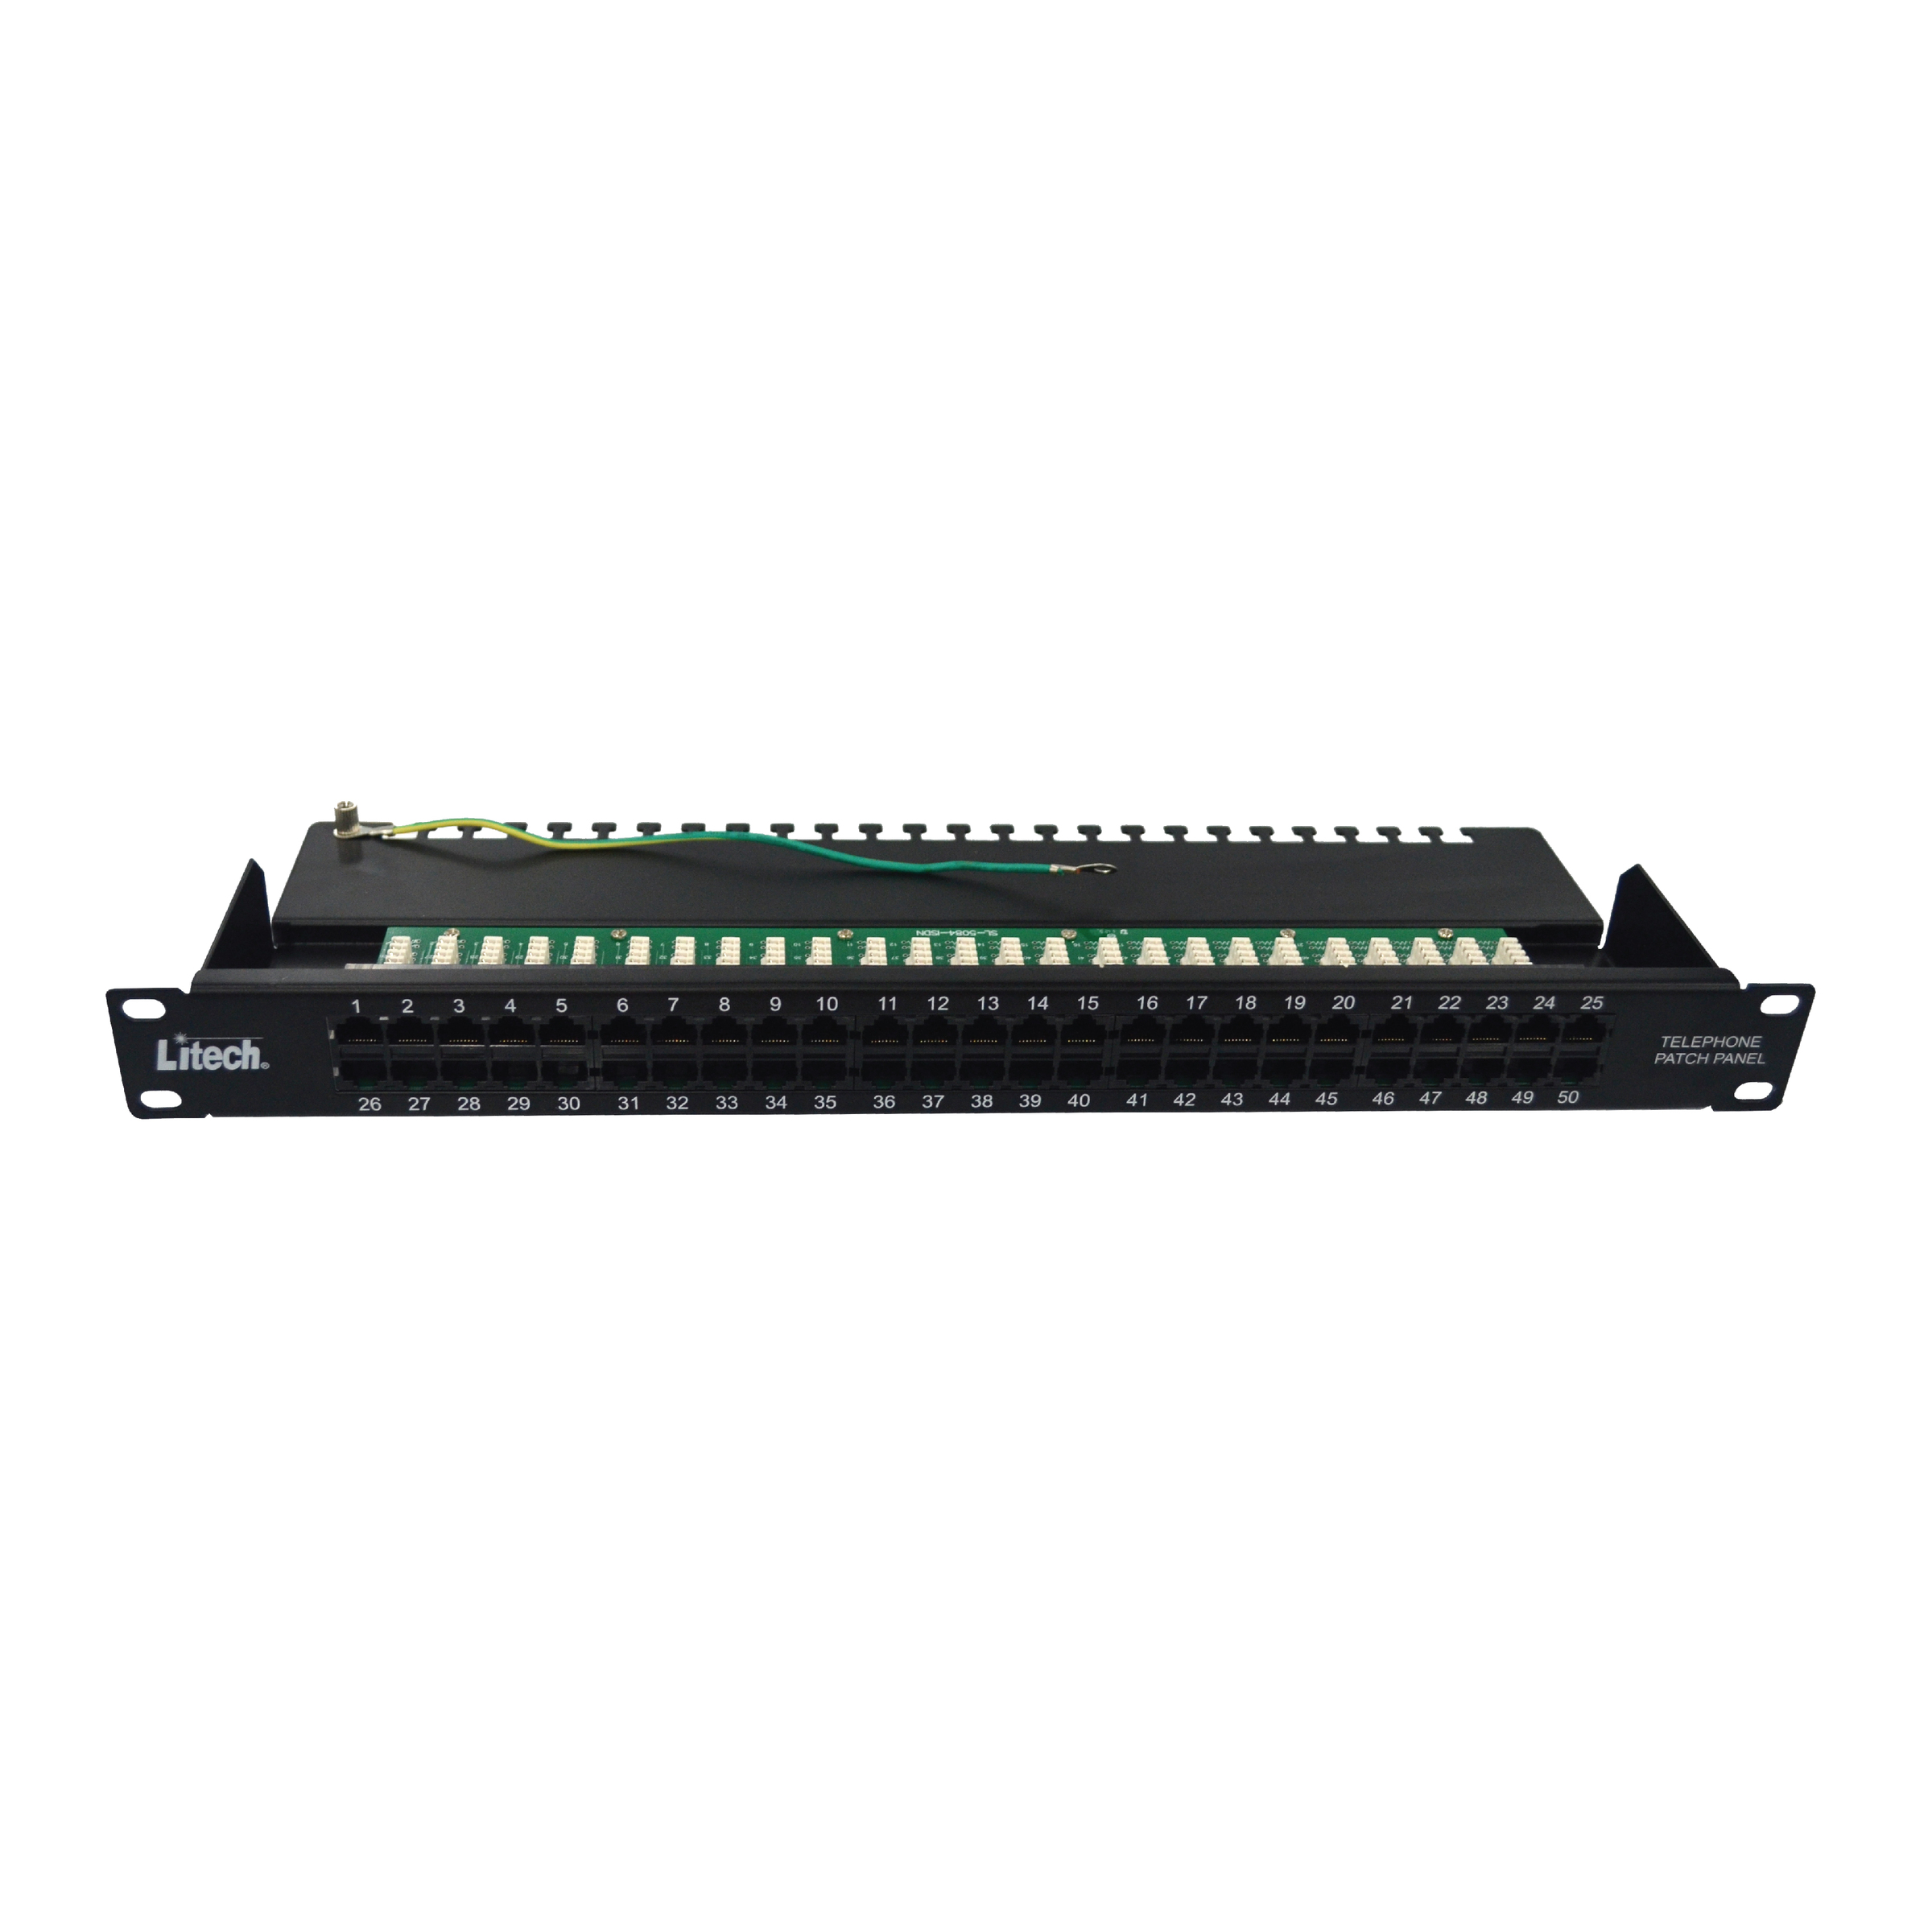 Voice & Data_Modular Connecting System_High Density Voice Patch Panel 50 Ports.jpg